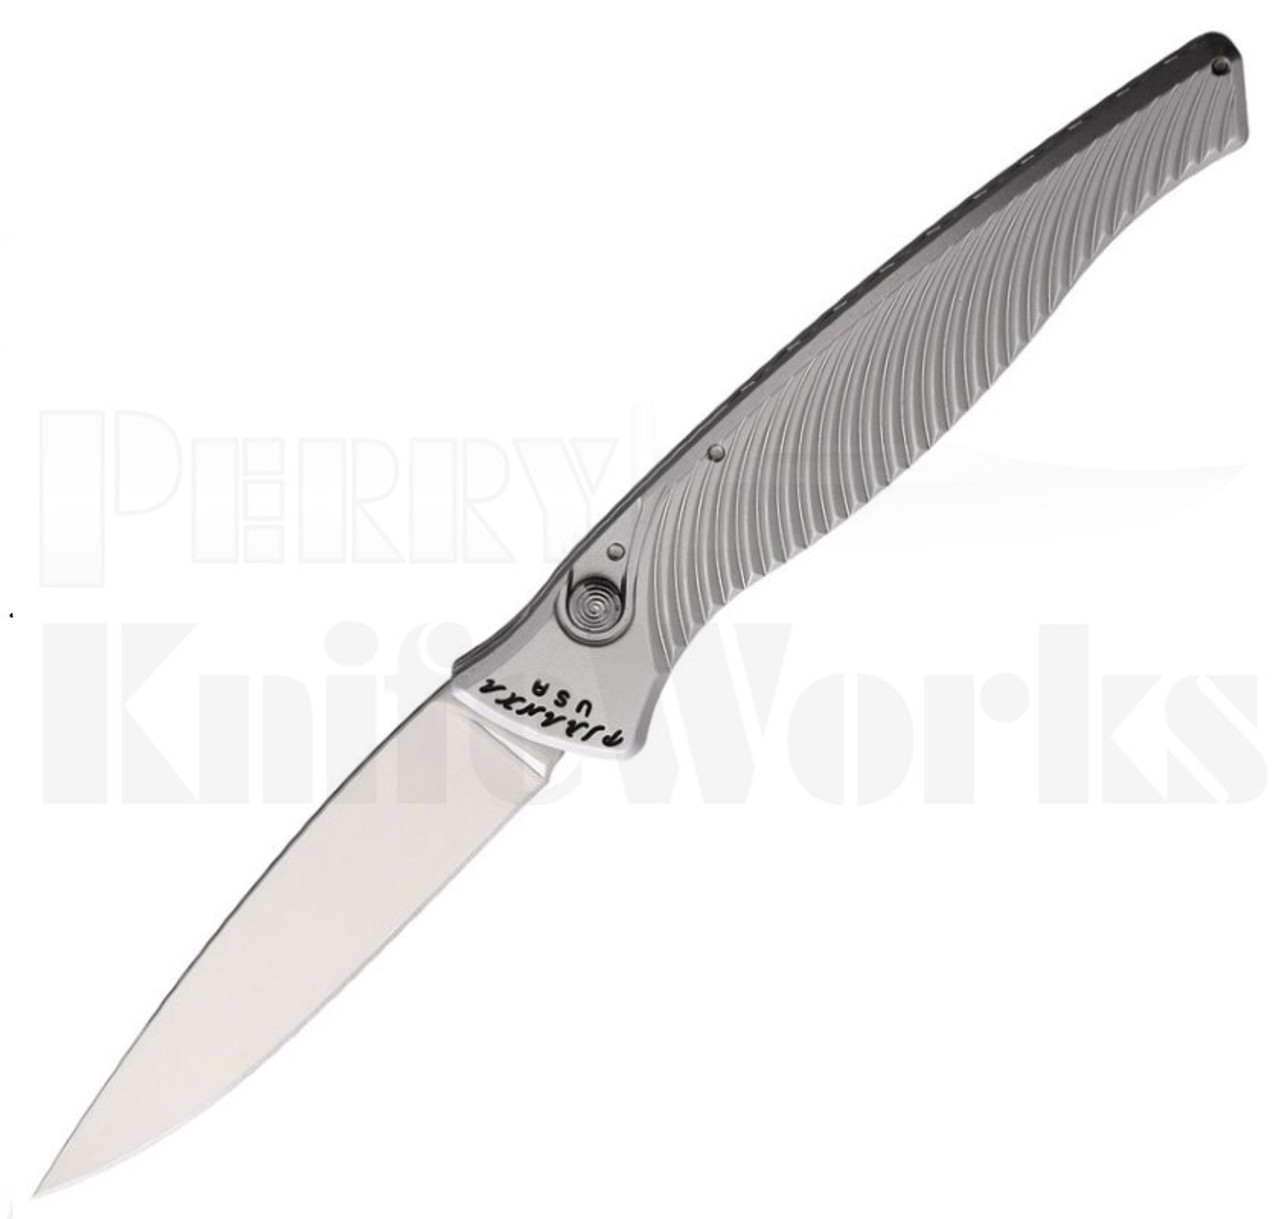 Piranha DNA Automatic Knife Silver P-16S l For Sale